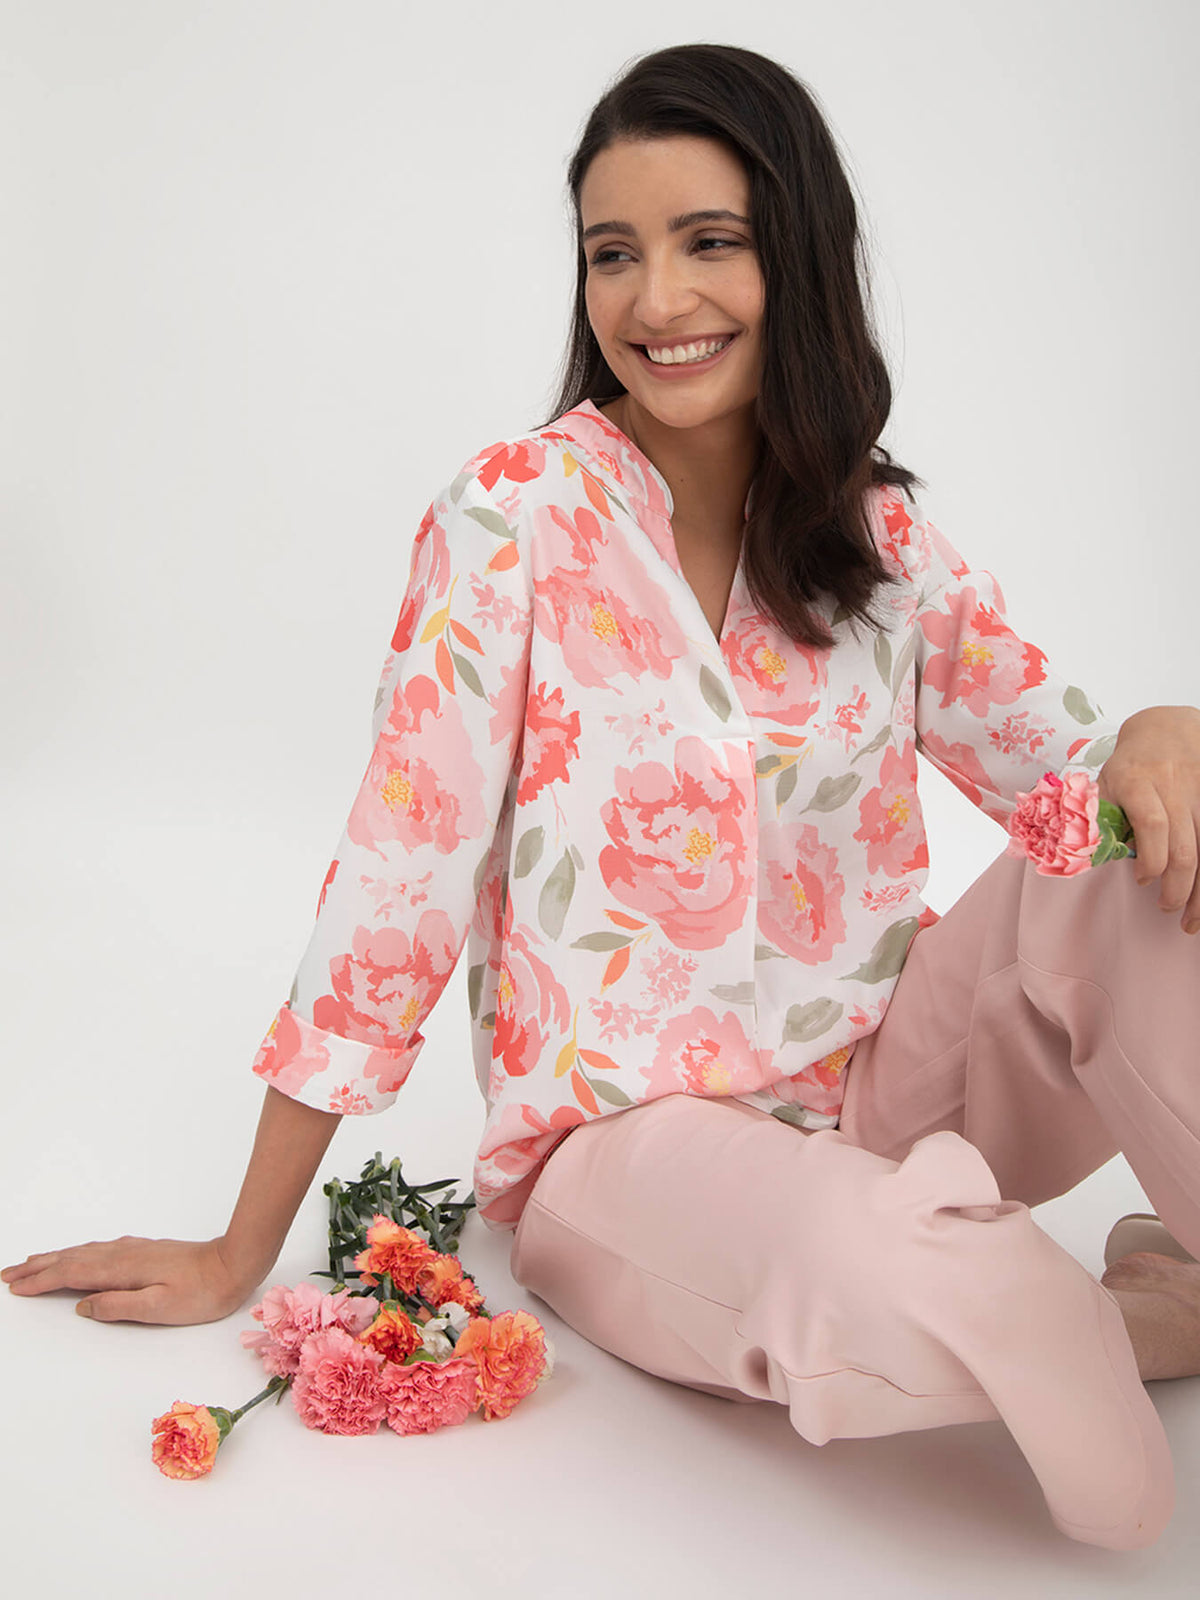 Floral Print Mandarin Neck Top - White And Pink